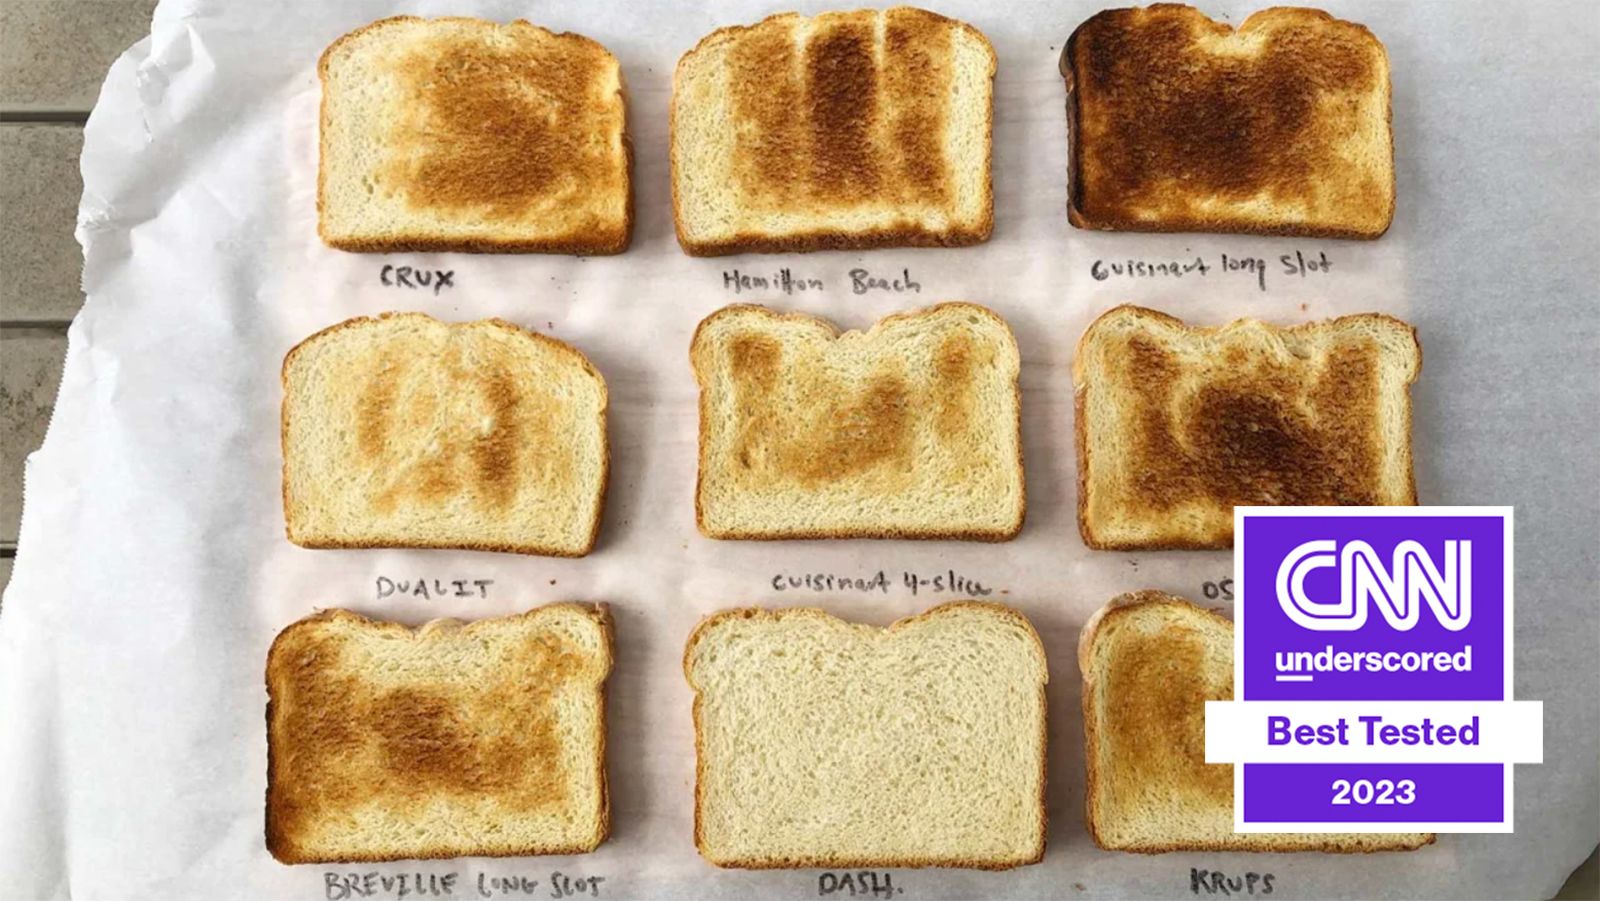 5 Best Toasters 2023 Reviewed : Top-Rated Bread Toasters